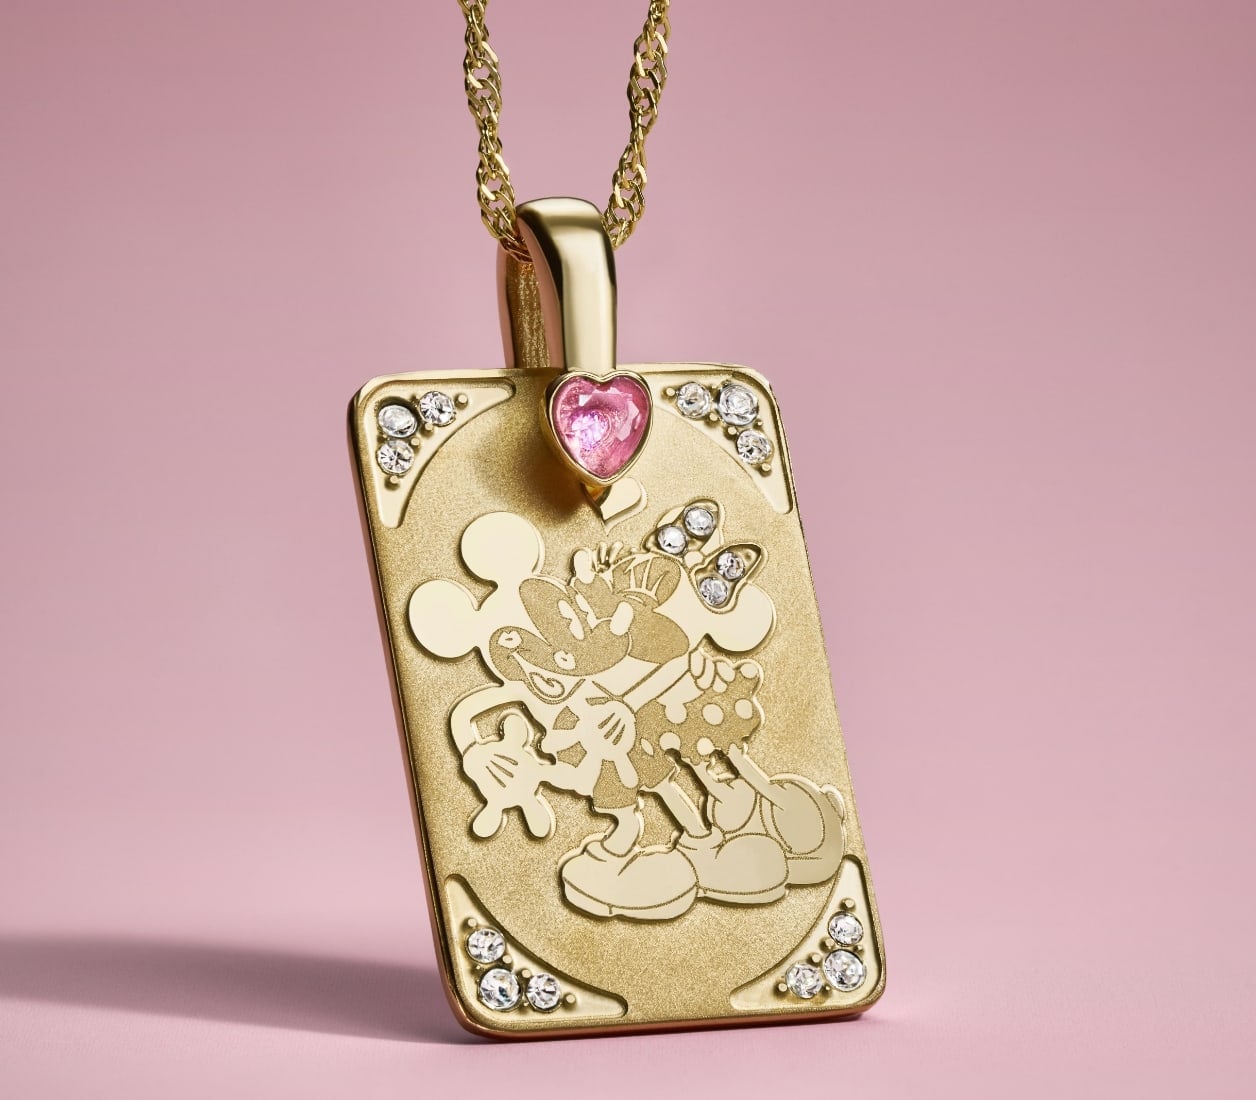 The gold-tone pendant necklace featuring Mickey Mouse and Minnie Mouse and crystal accents.